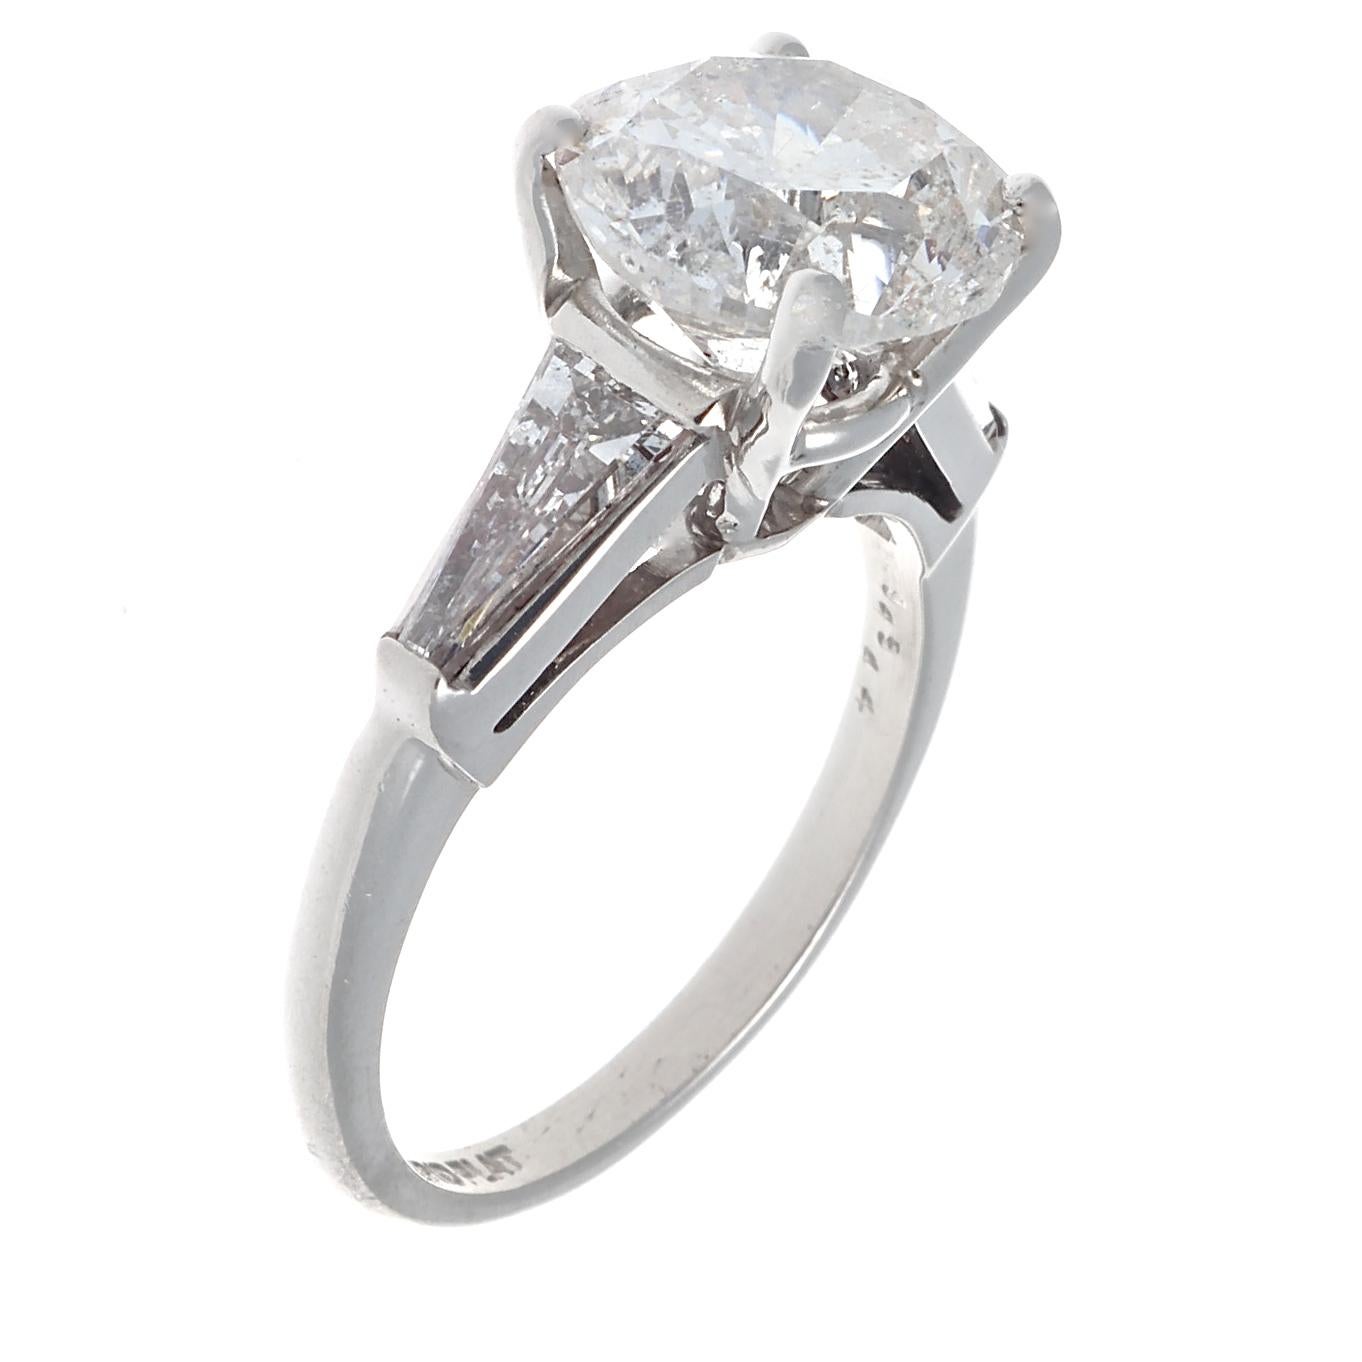 3 carat solitaire engagement ring